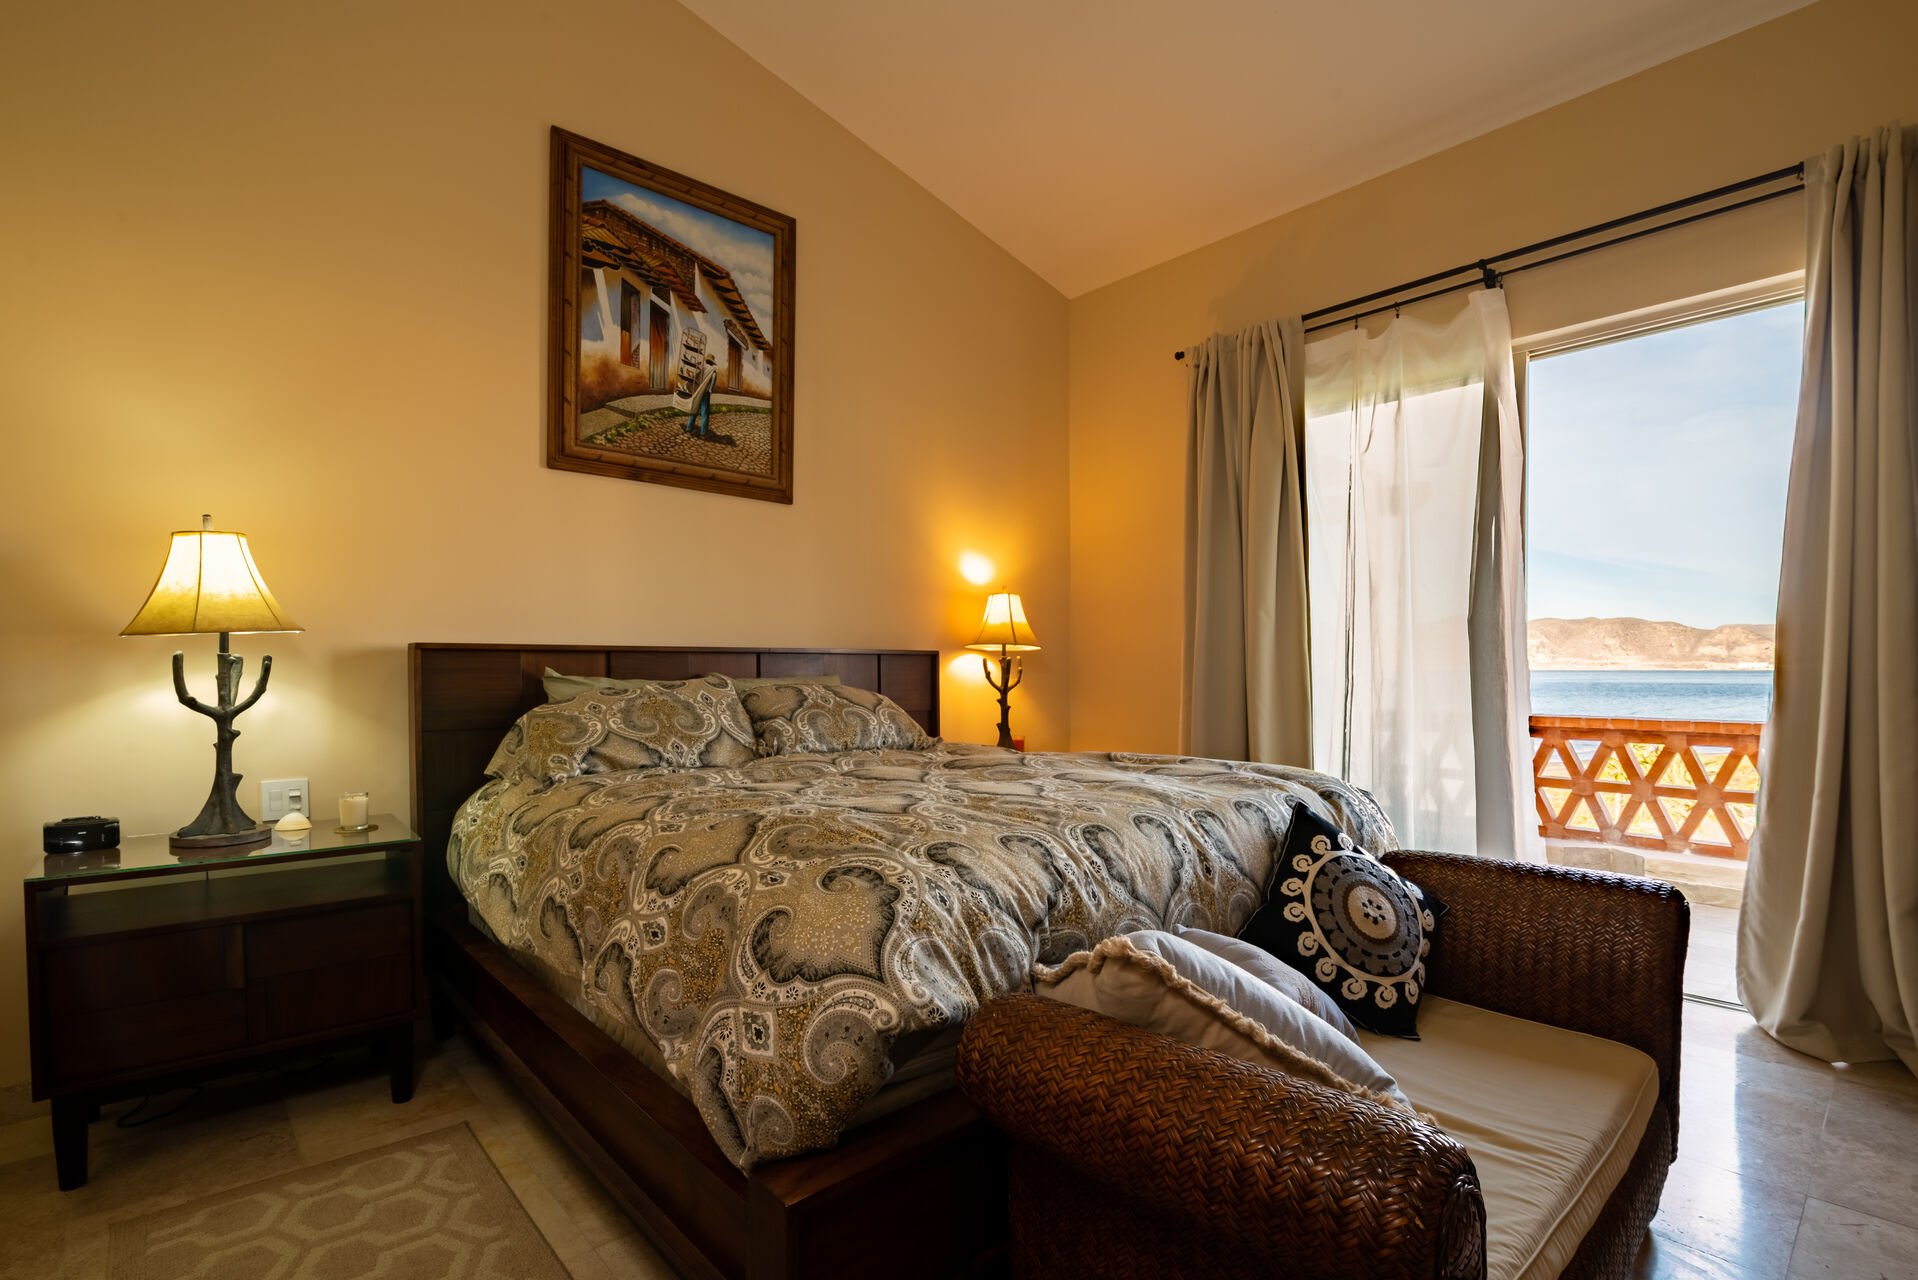 Guest bedroom with seaview.